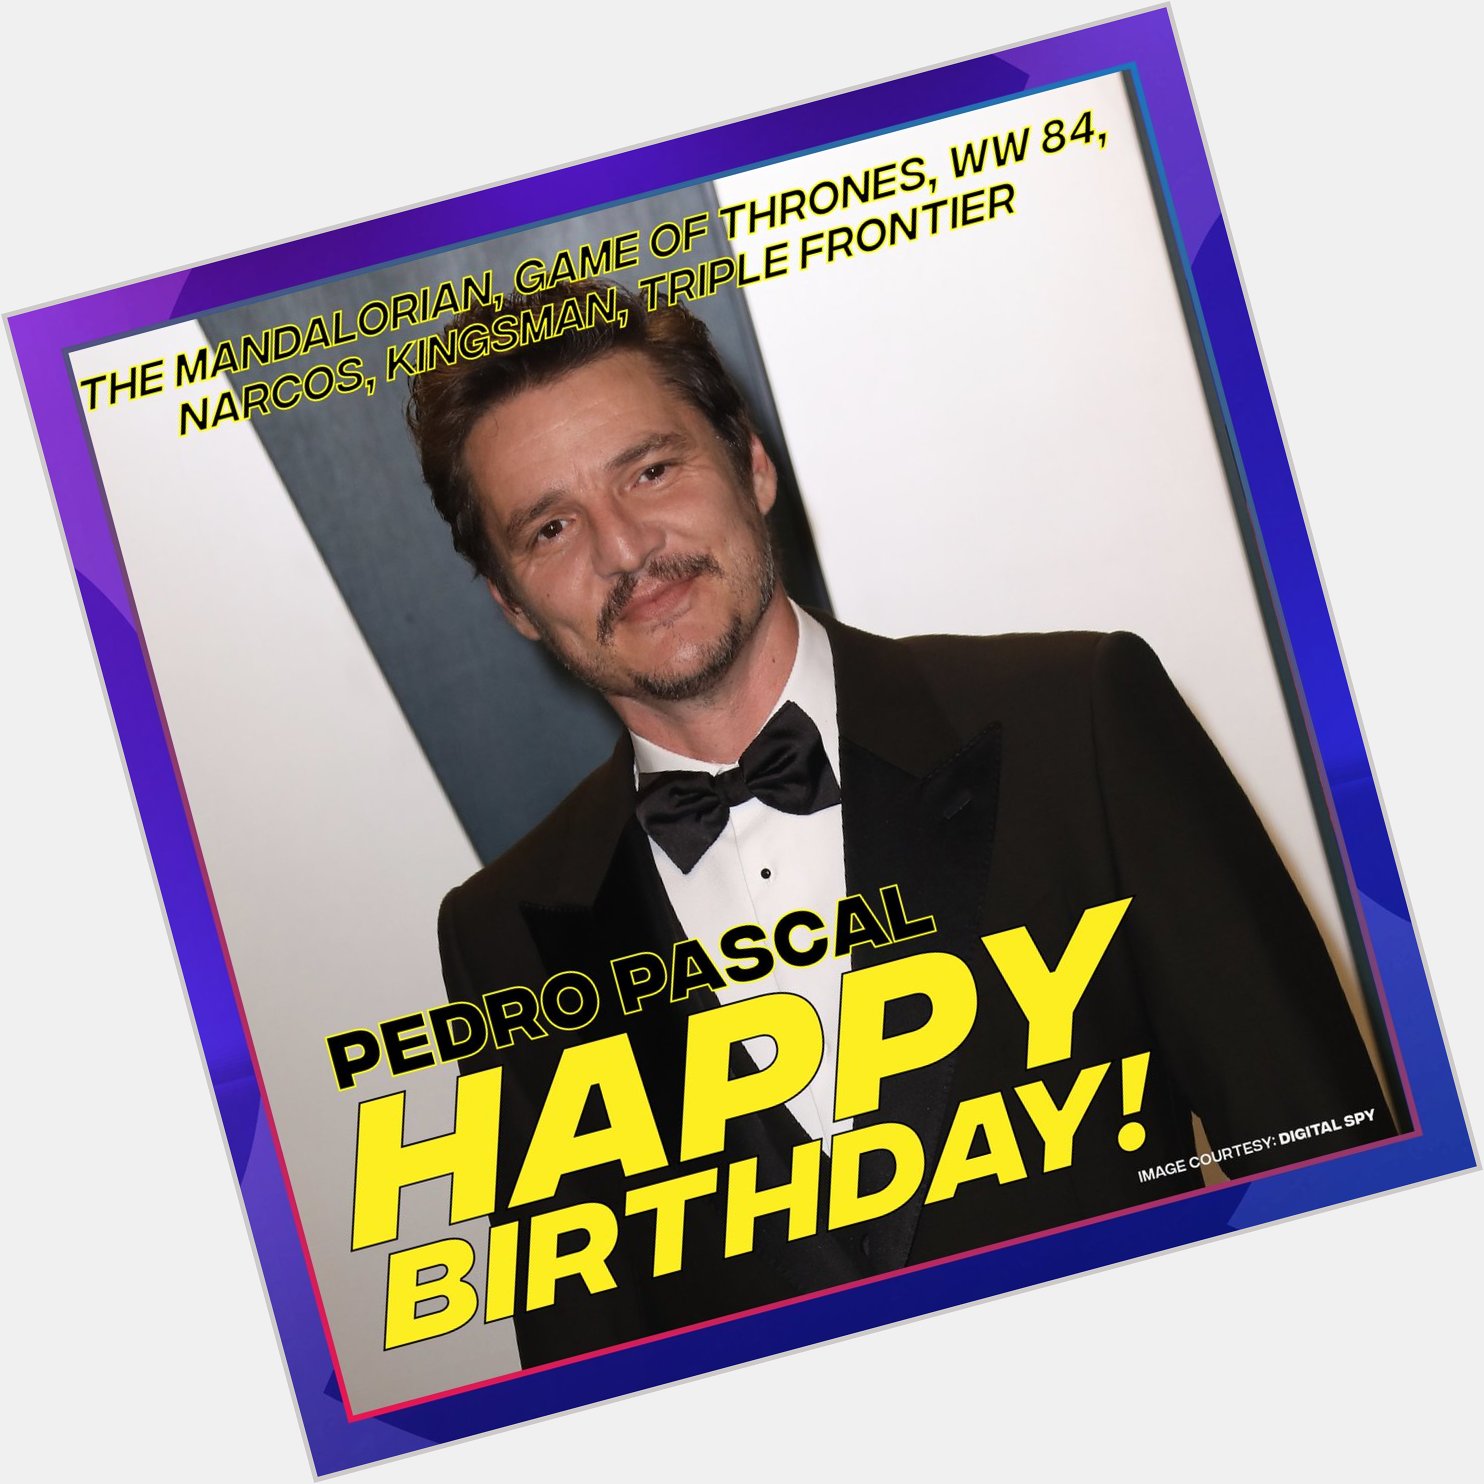  Wishing a Happy Birthday to one and only Pedro Pascal!     